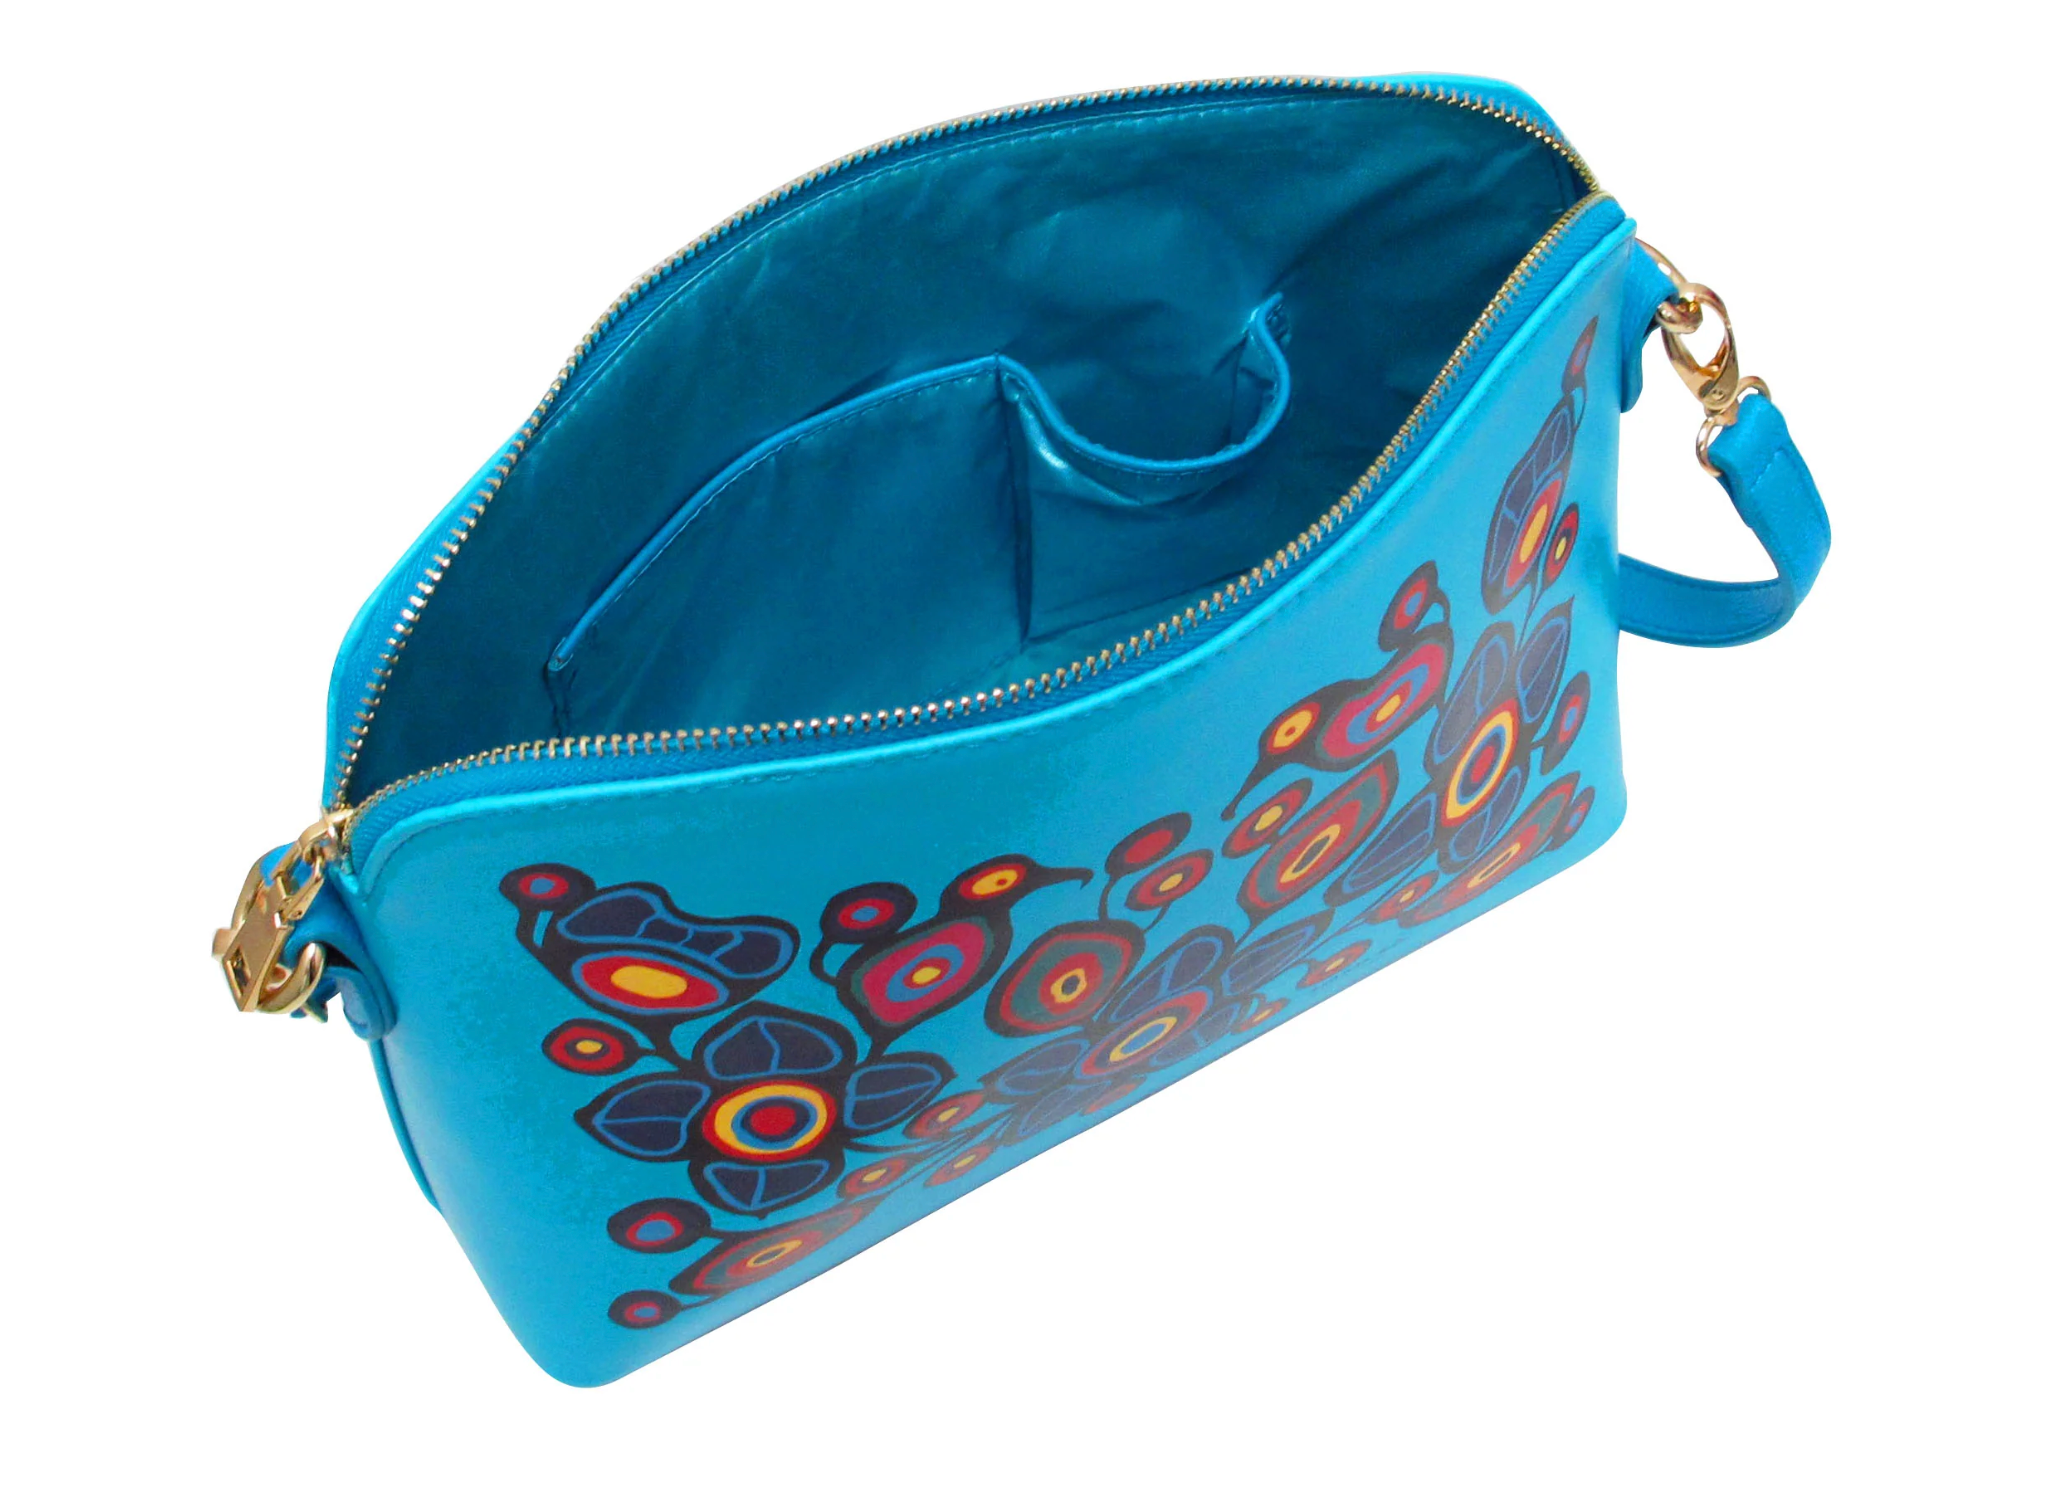 Norval Morrisseau Flowers and Birds Purse